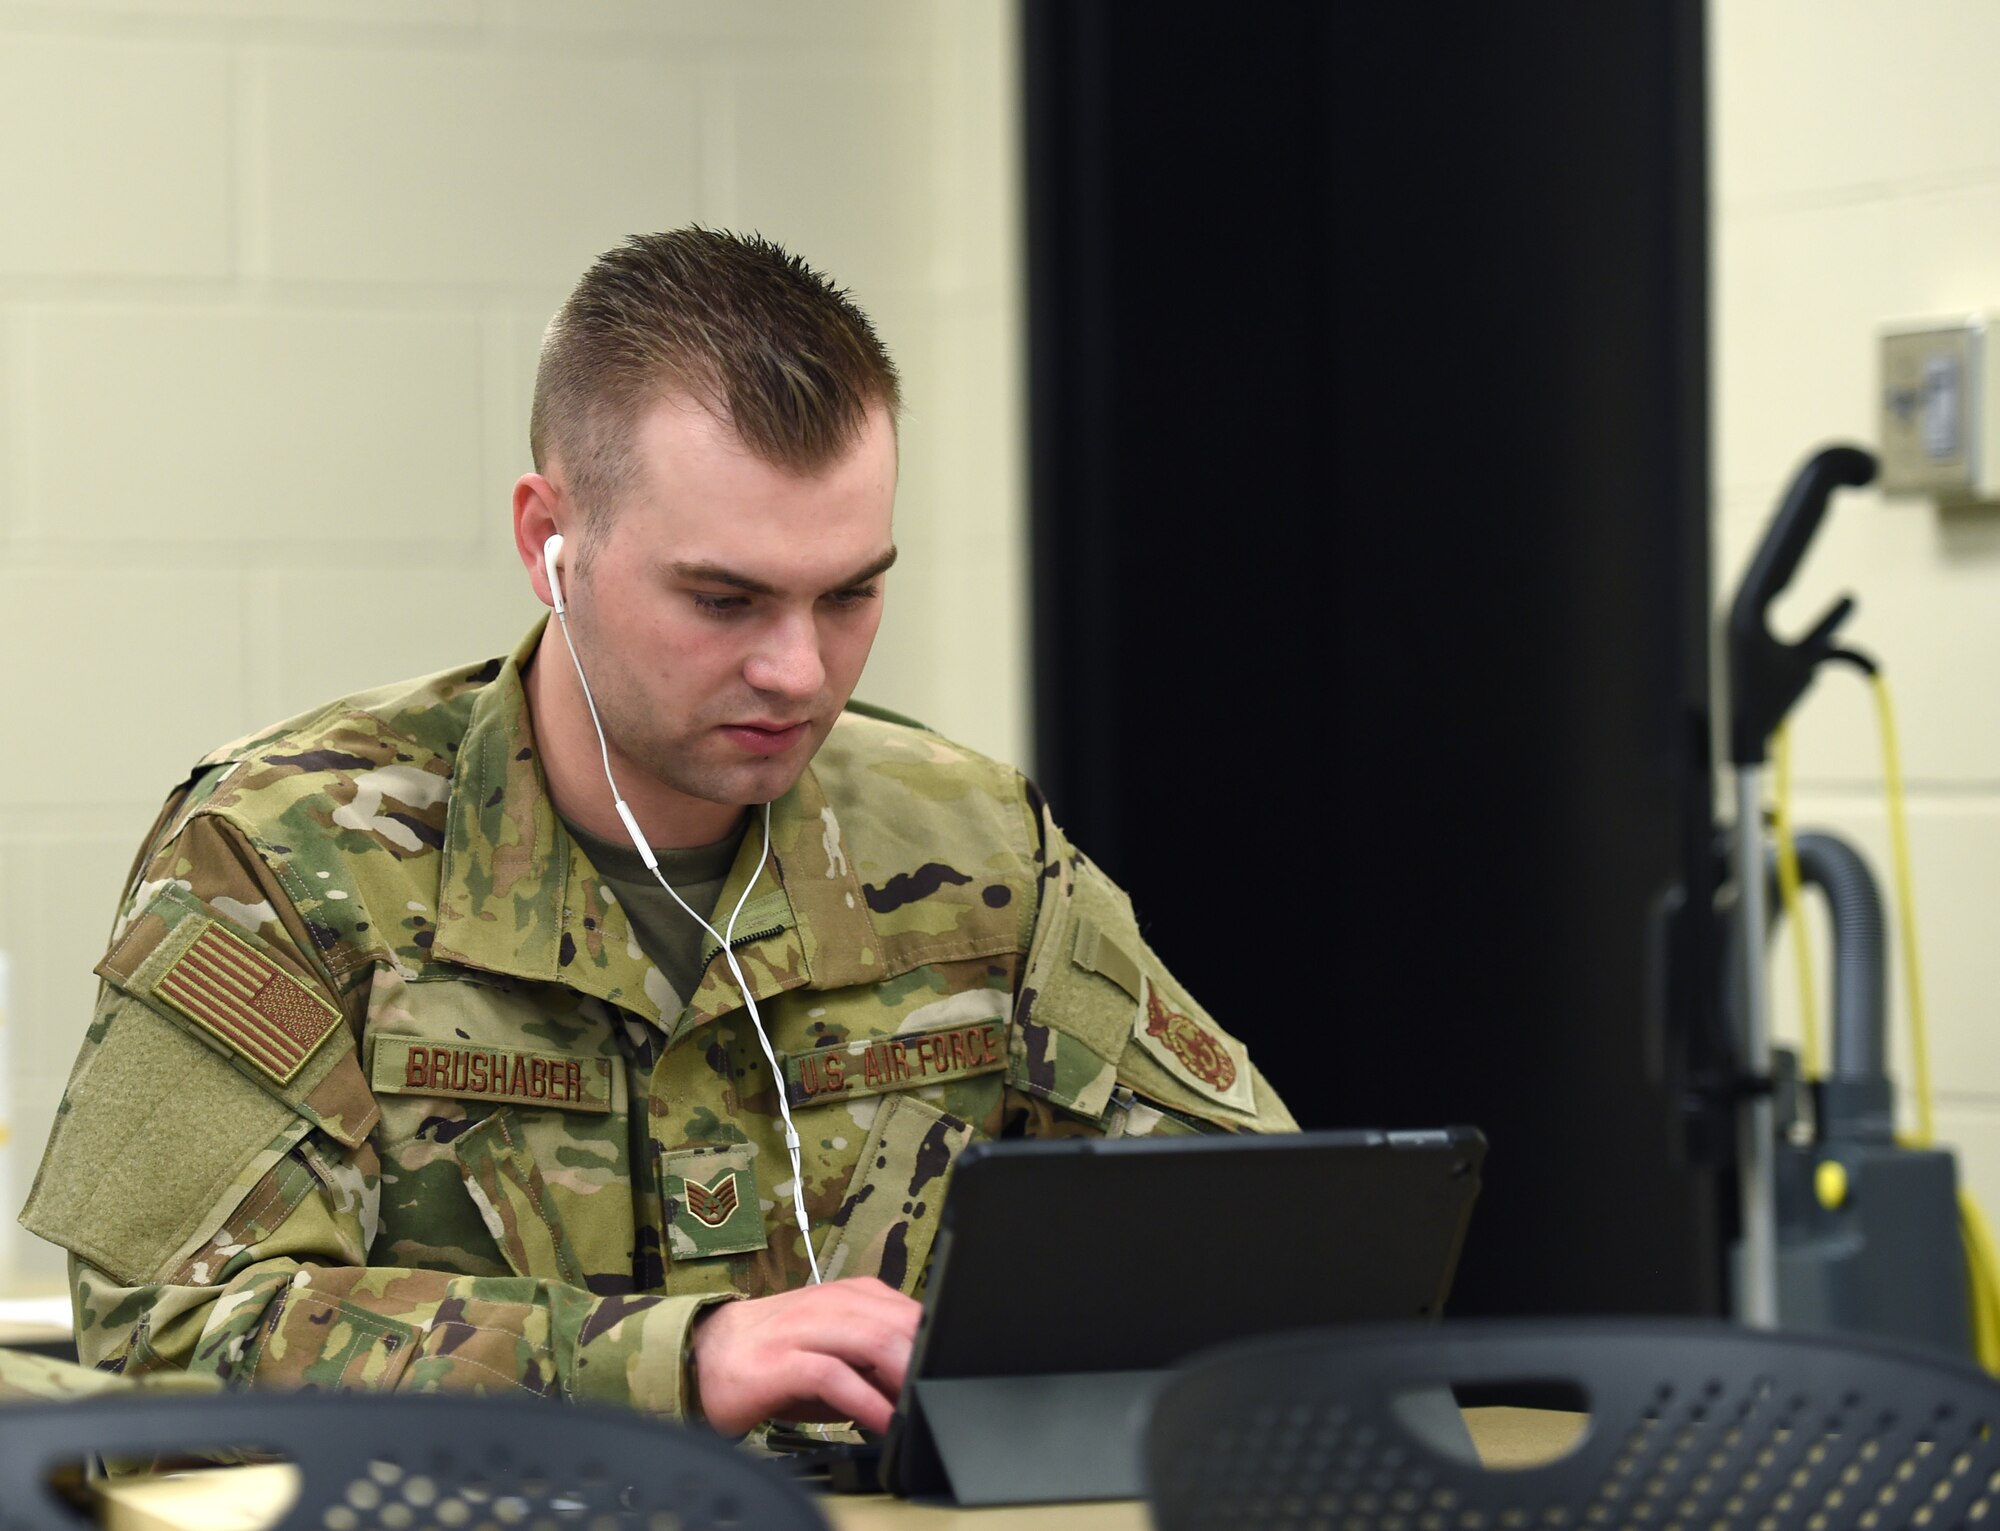 Staff Sgt. Jonathan Brushaber, 132d Wing firefighter, conducts a contact tracing call with a COVID-19 patient May 29, 2020, at the Camp Dodge in Johnston, Iowa. The call center assists the Iowa Department of Public Health with contact tracing. (U.S. Air National Guard photo by Staff Sgt. Michael J. Kelly)